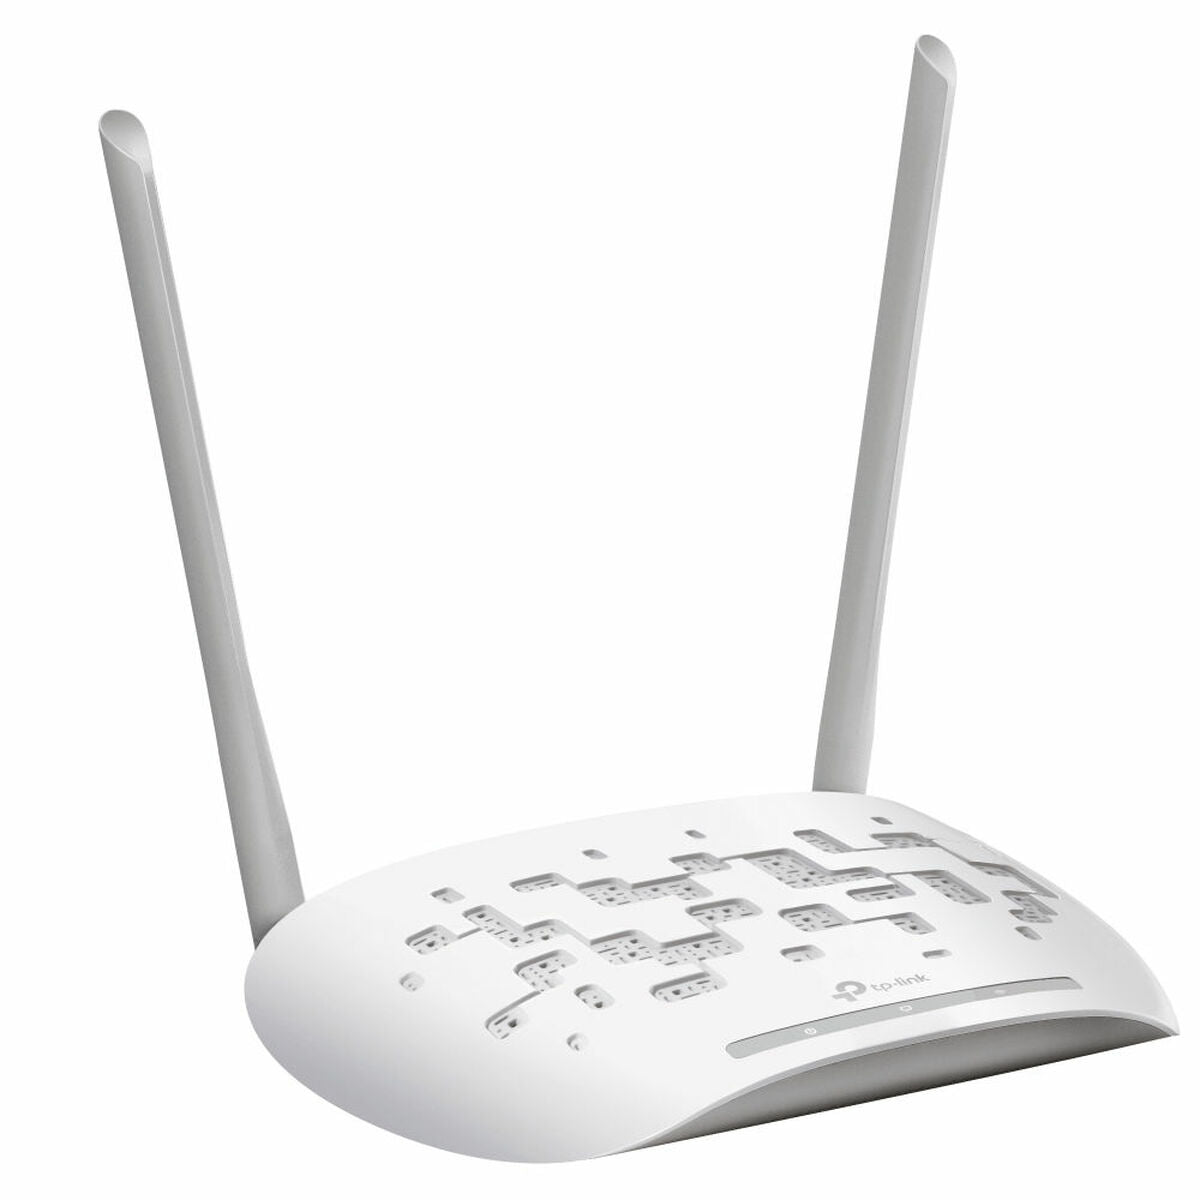 Access Point Repeater TP-Link TL-WA801N 300 Mbps 2.4 GHz